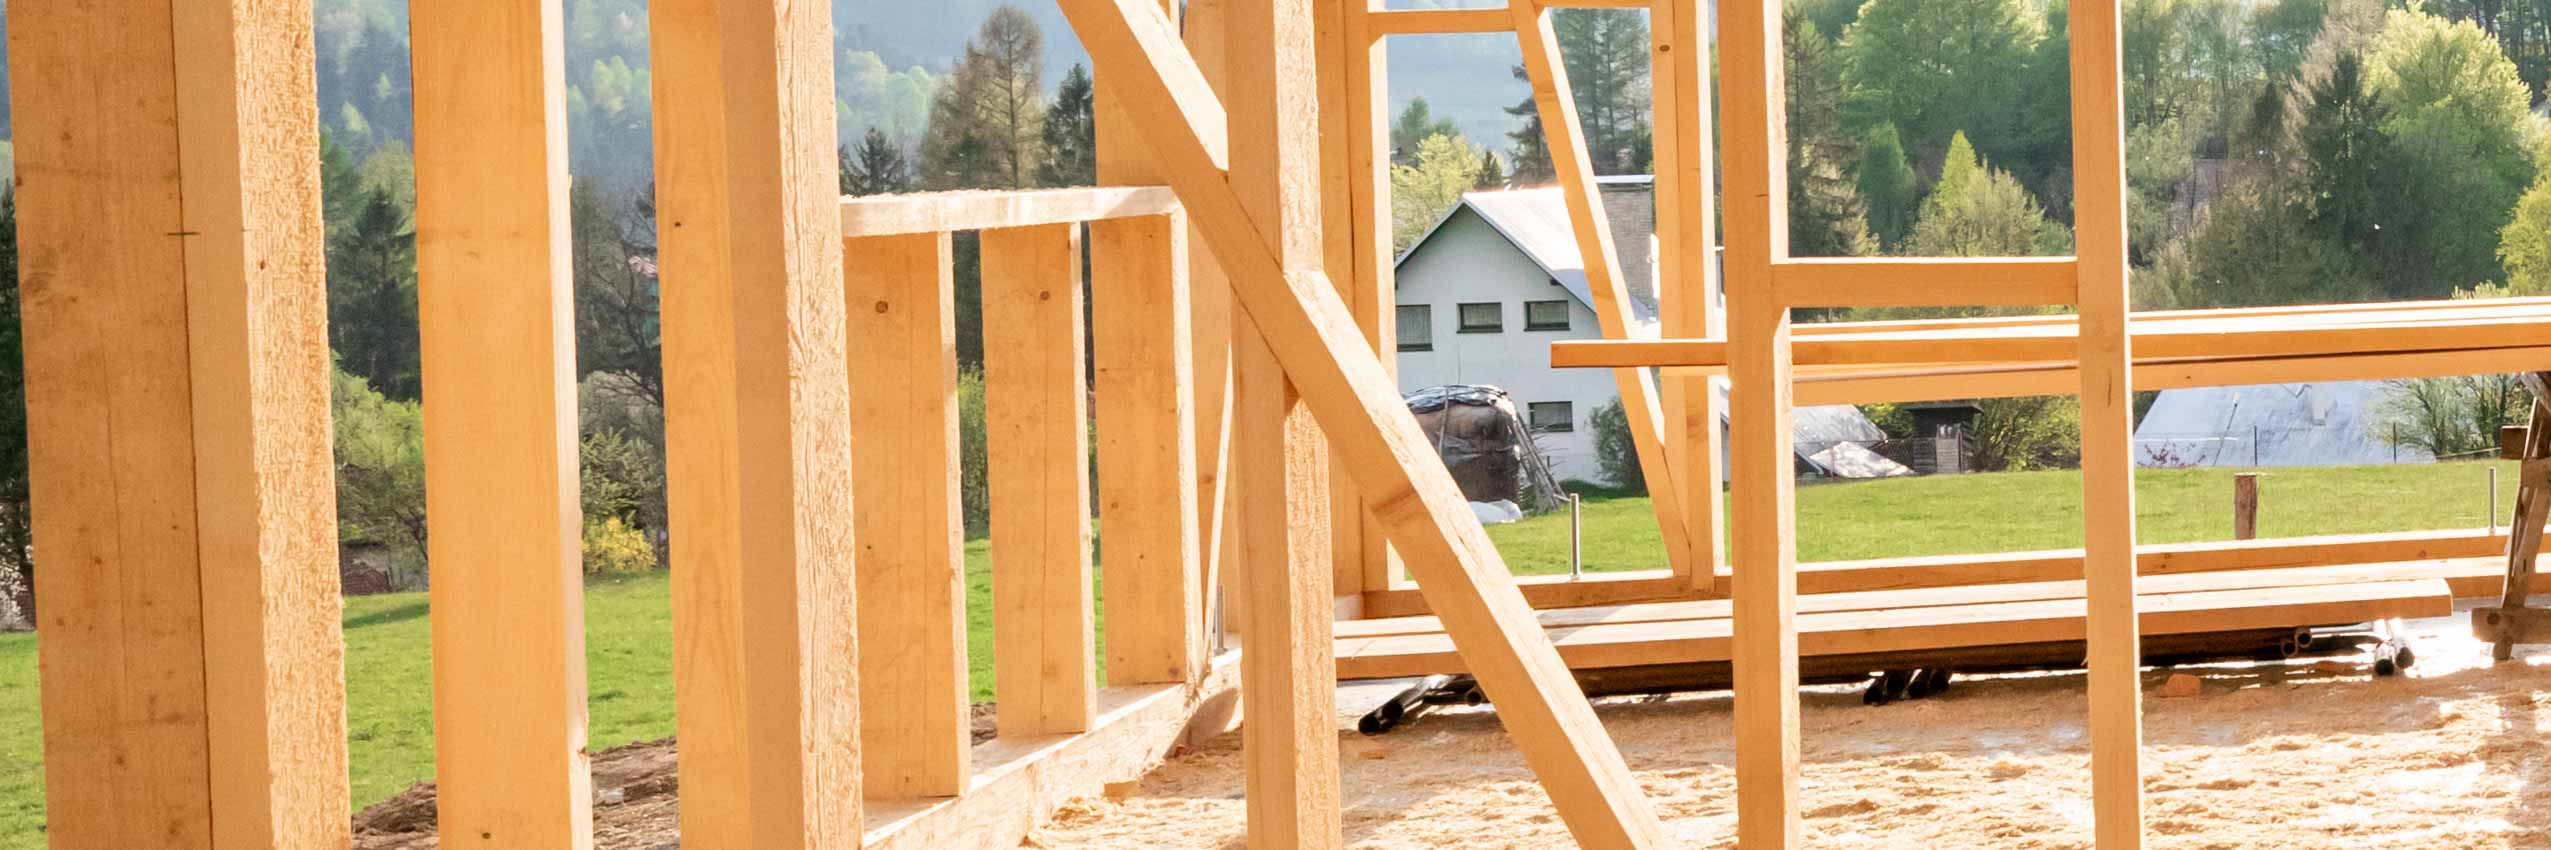 House Framing Cost